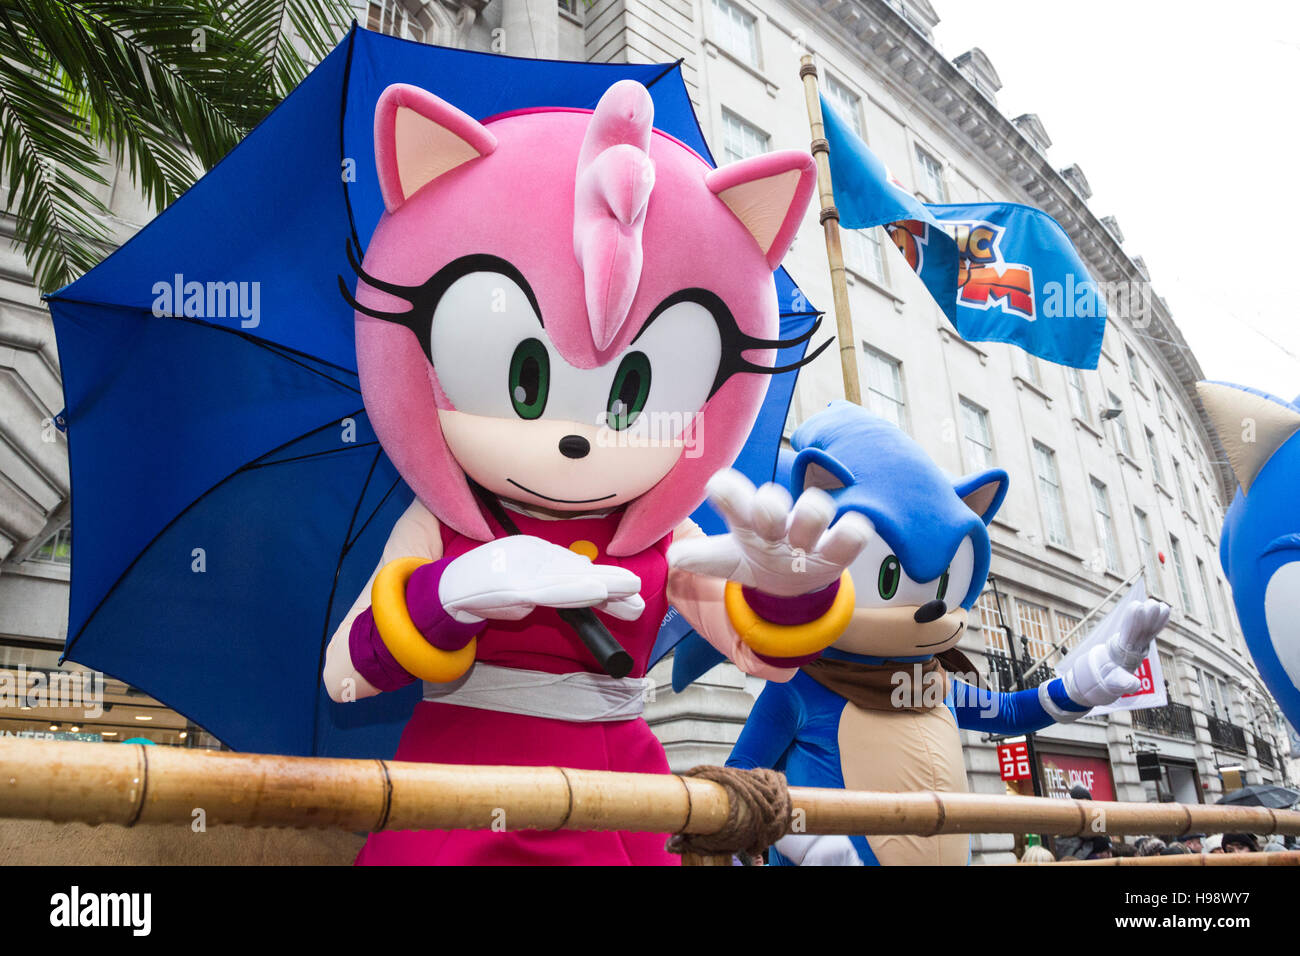 London, UK. 20 November 2016. Amy Rose and Sonic the Hedgehog. The Stock Photo ...1300 x 956